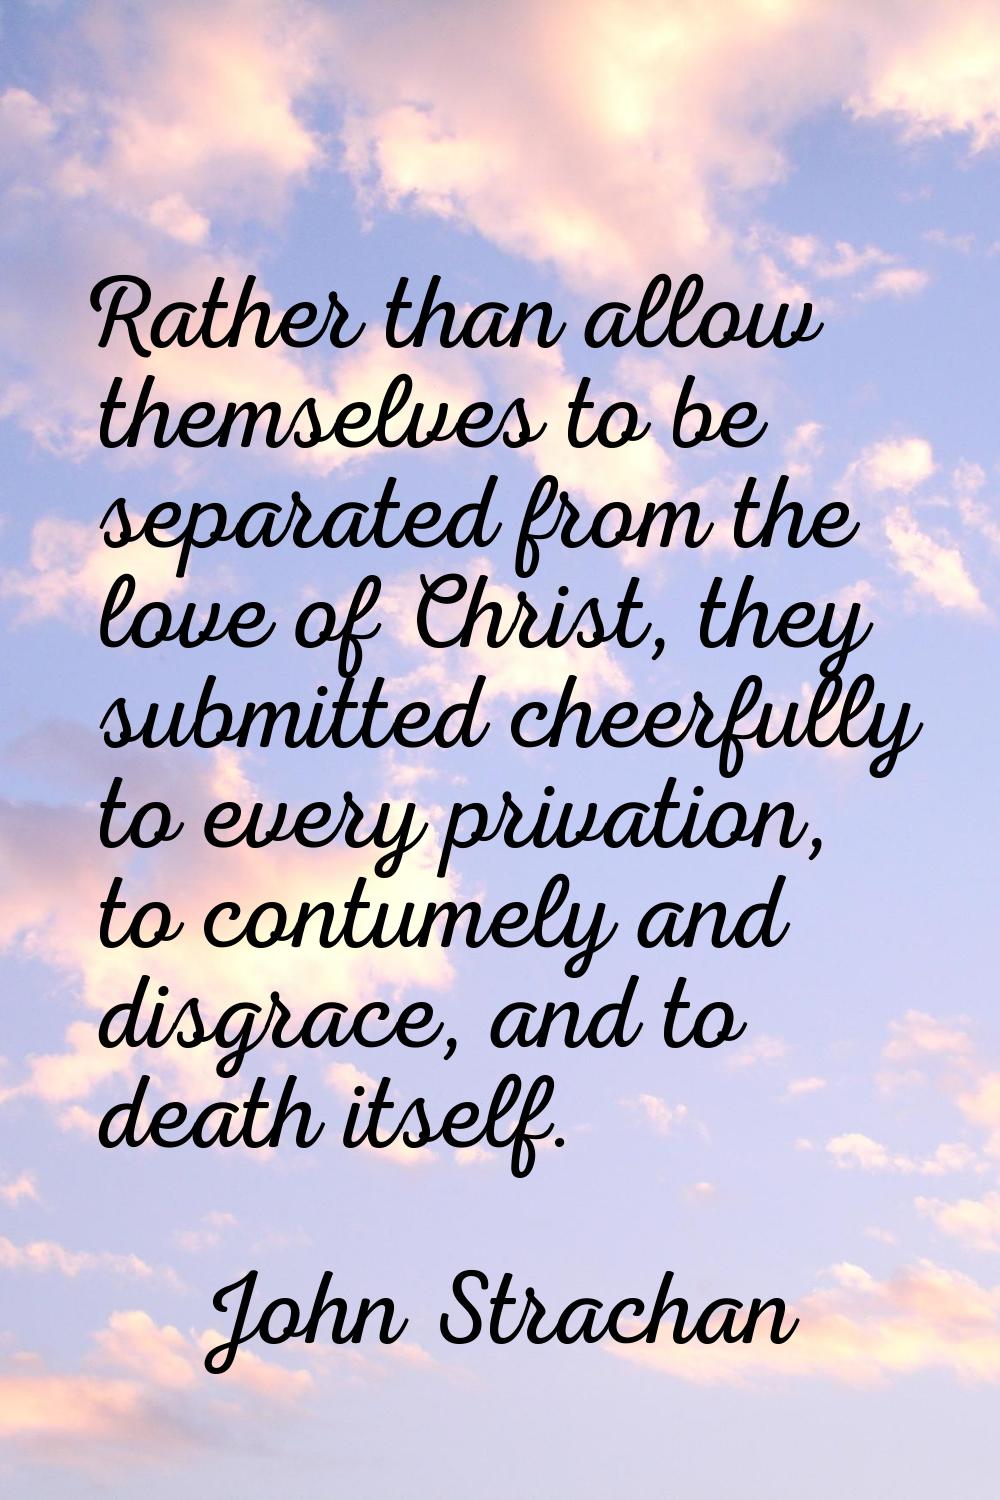 Rather than allow themselves to be separated from the love of Christ, they submitted cheerfully to 